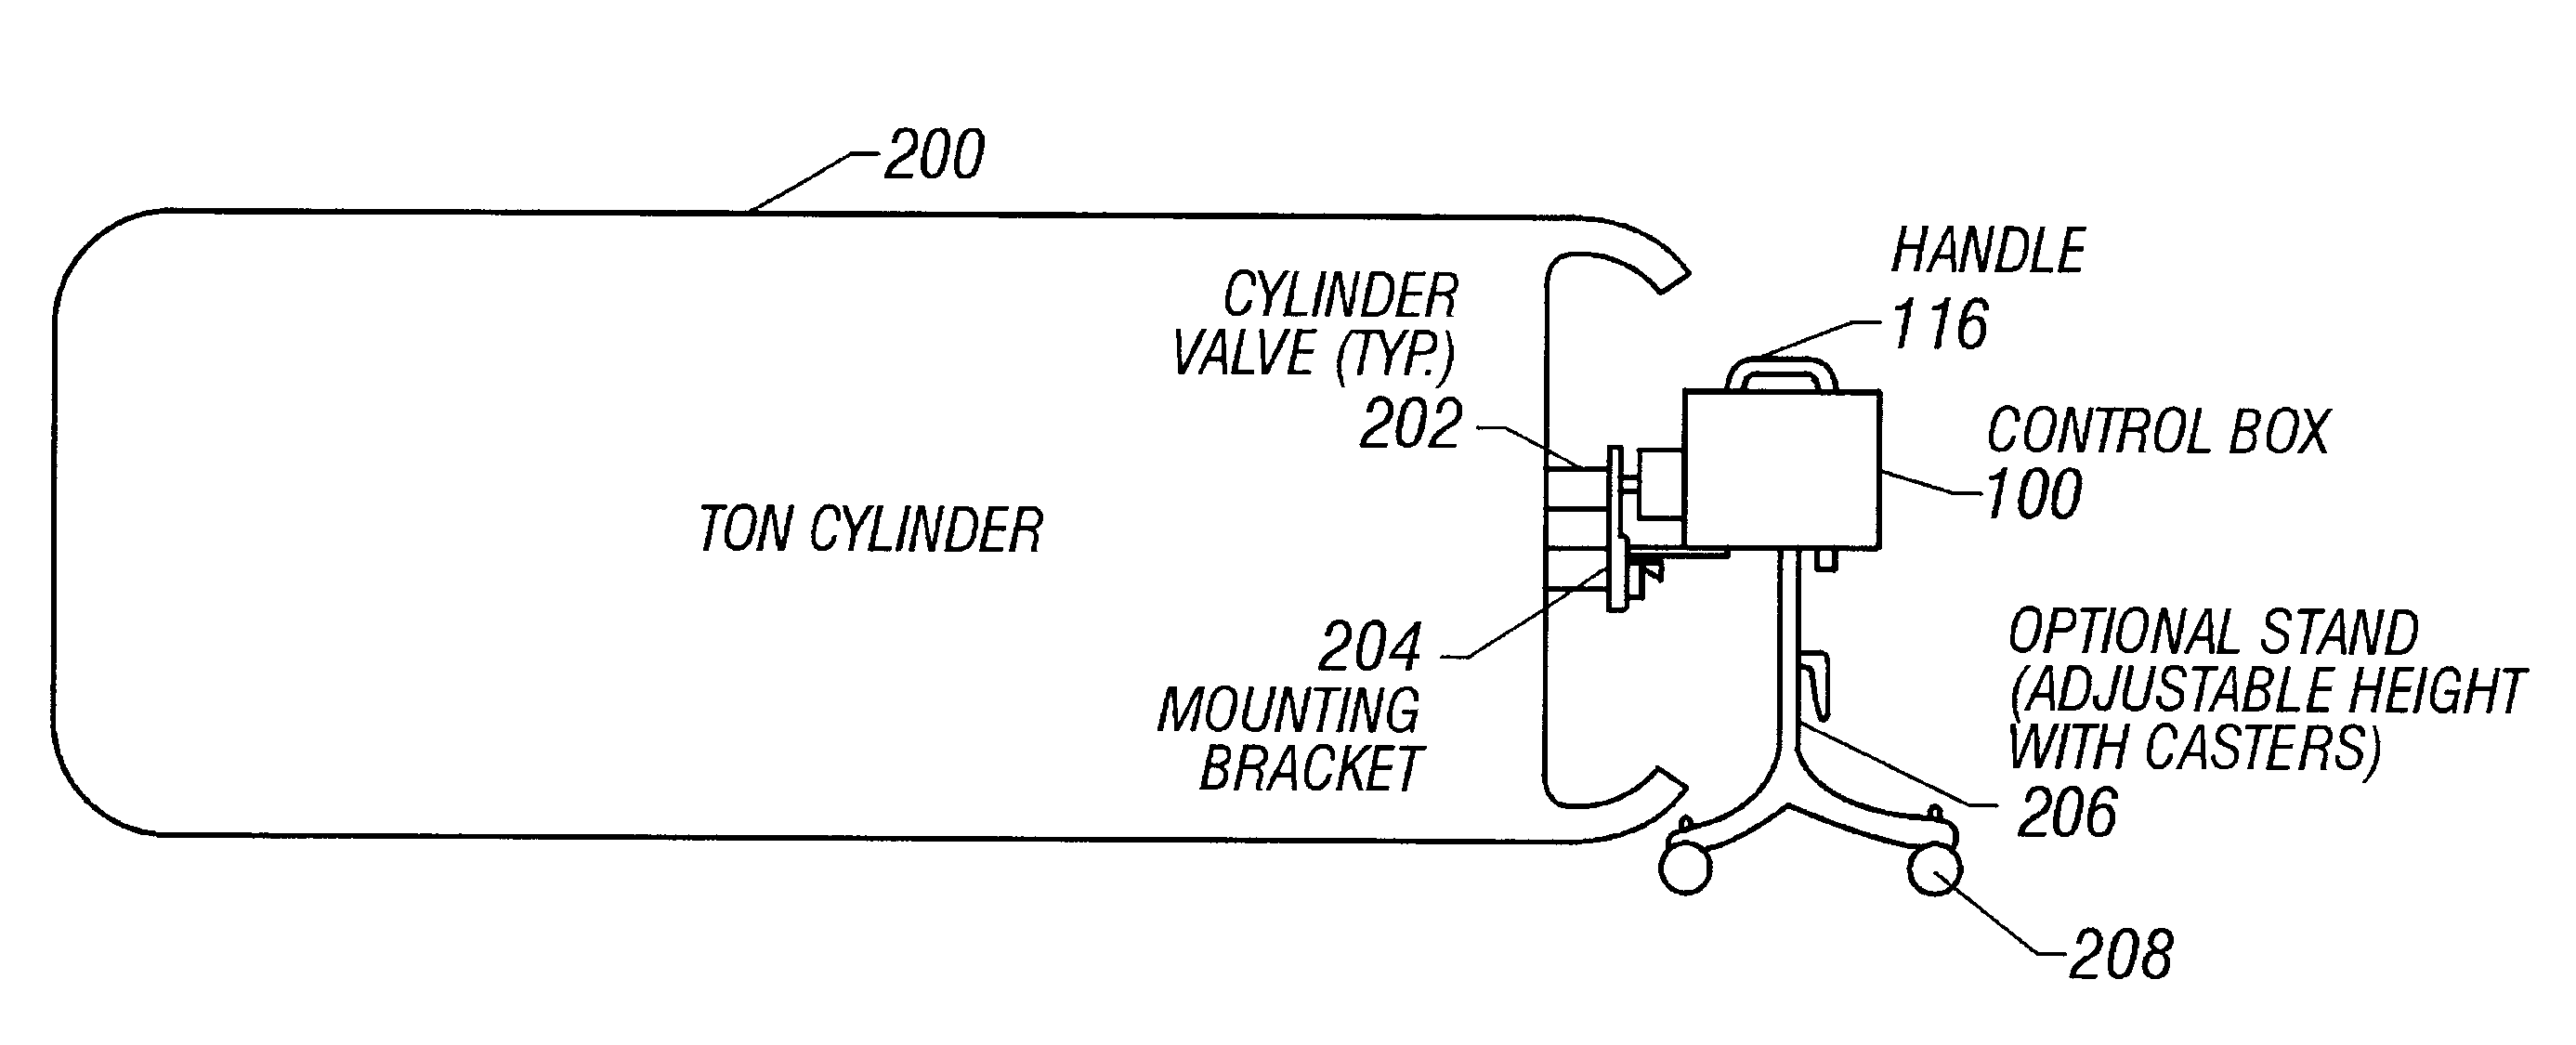 Automatic actuator system